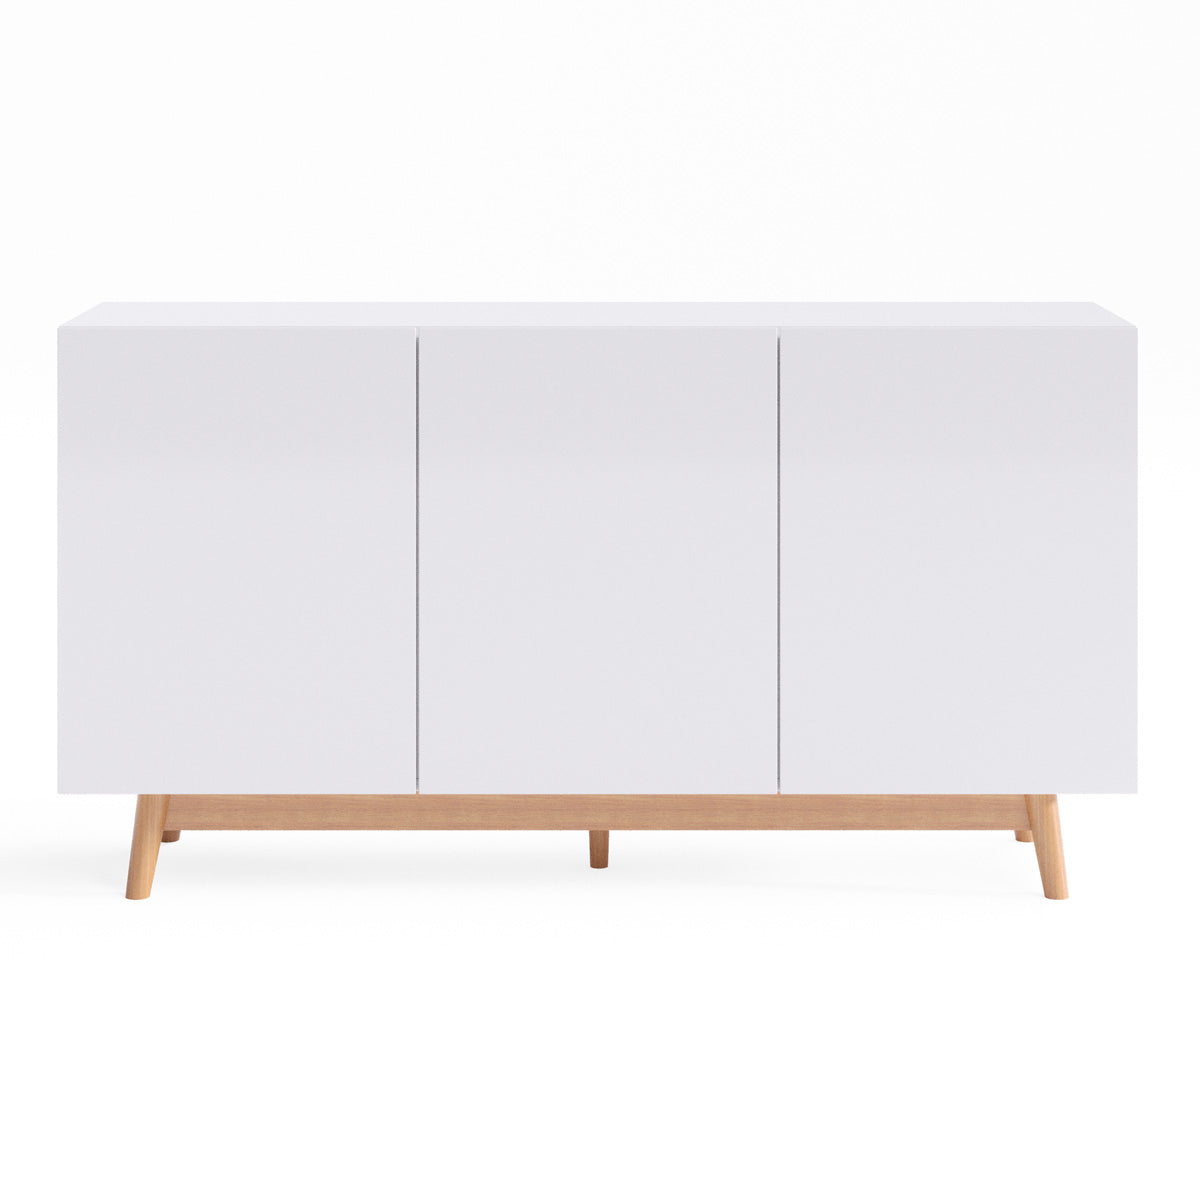 White Sideboard Buffet Unit with Solid Wood Legs (Aspen)